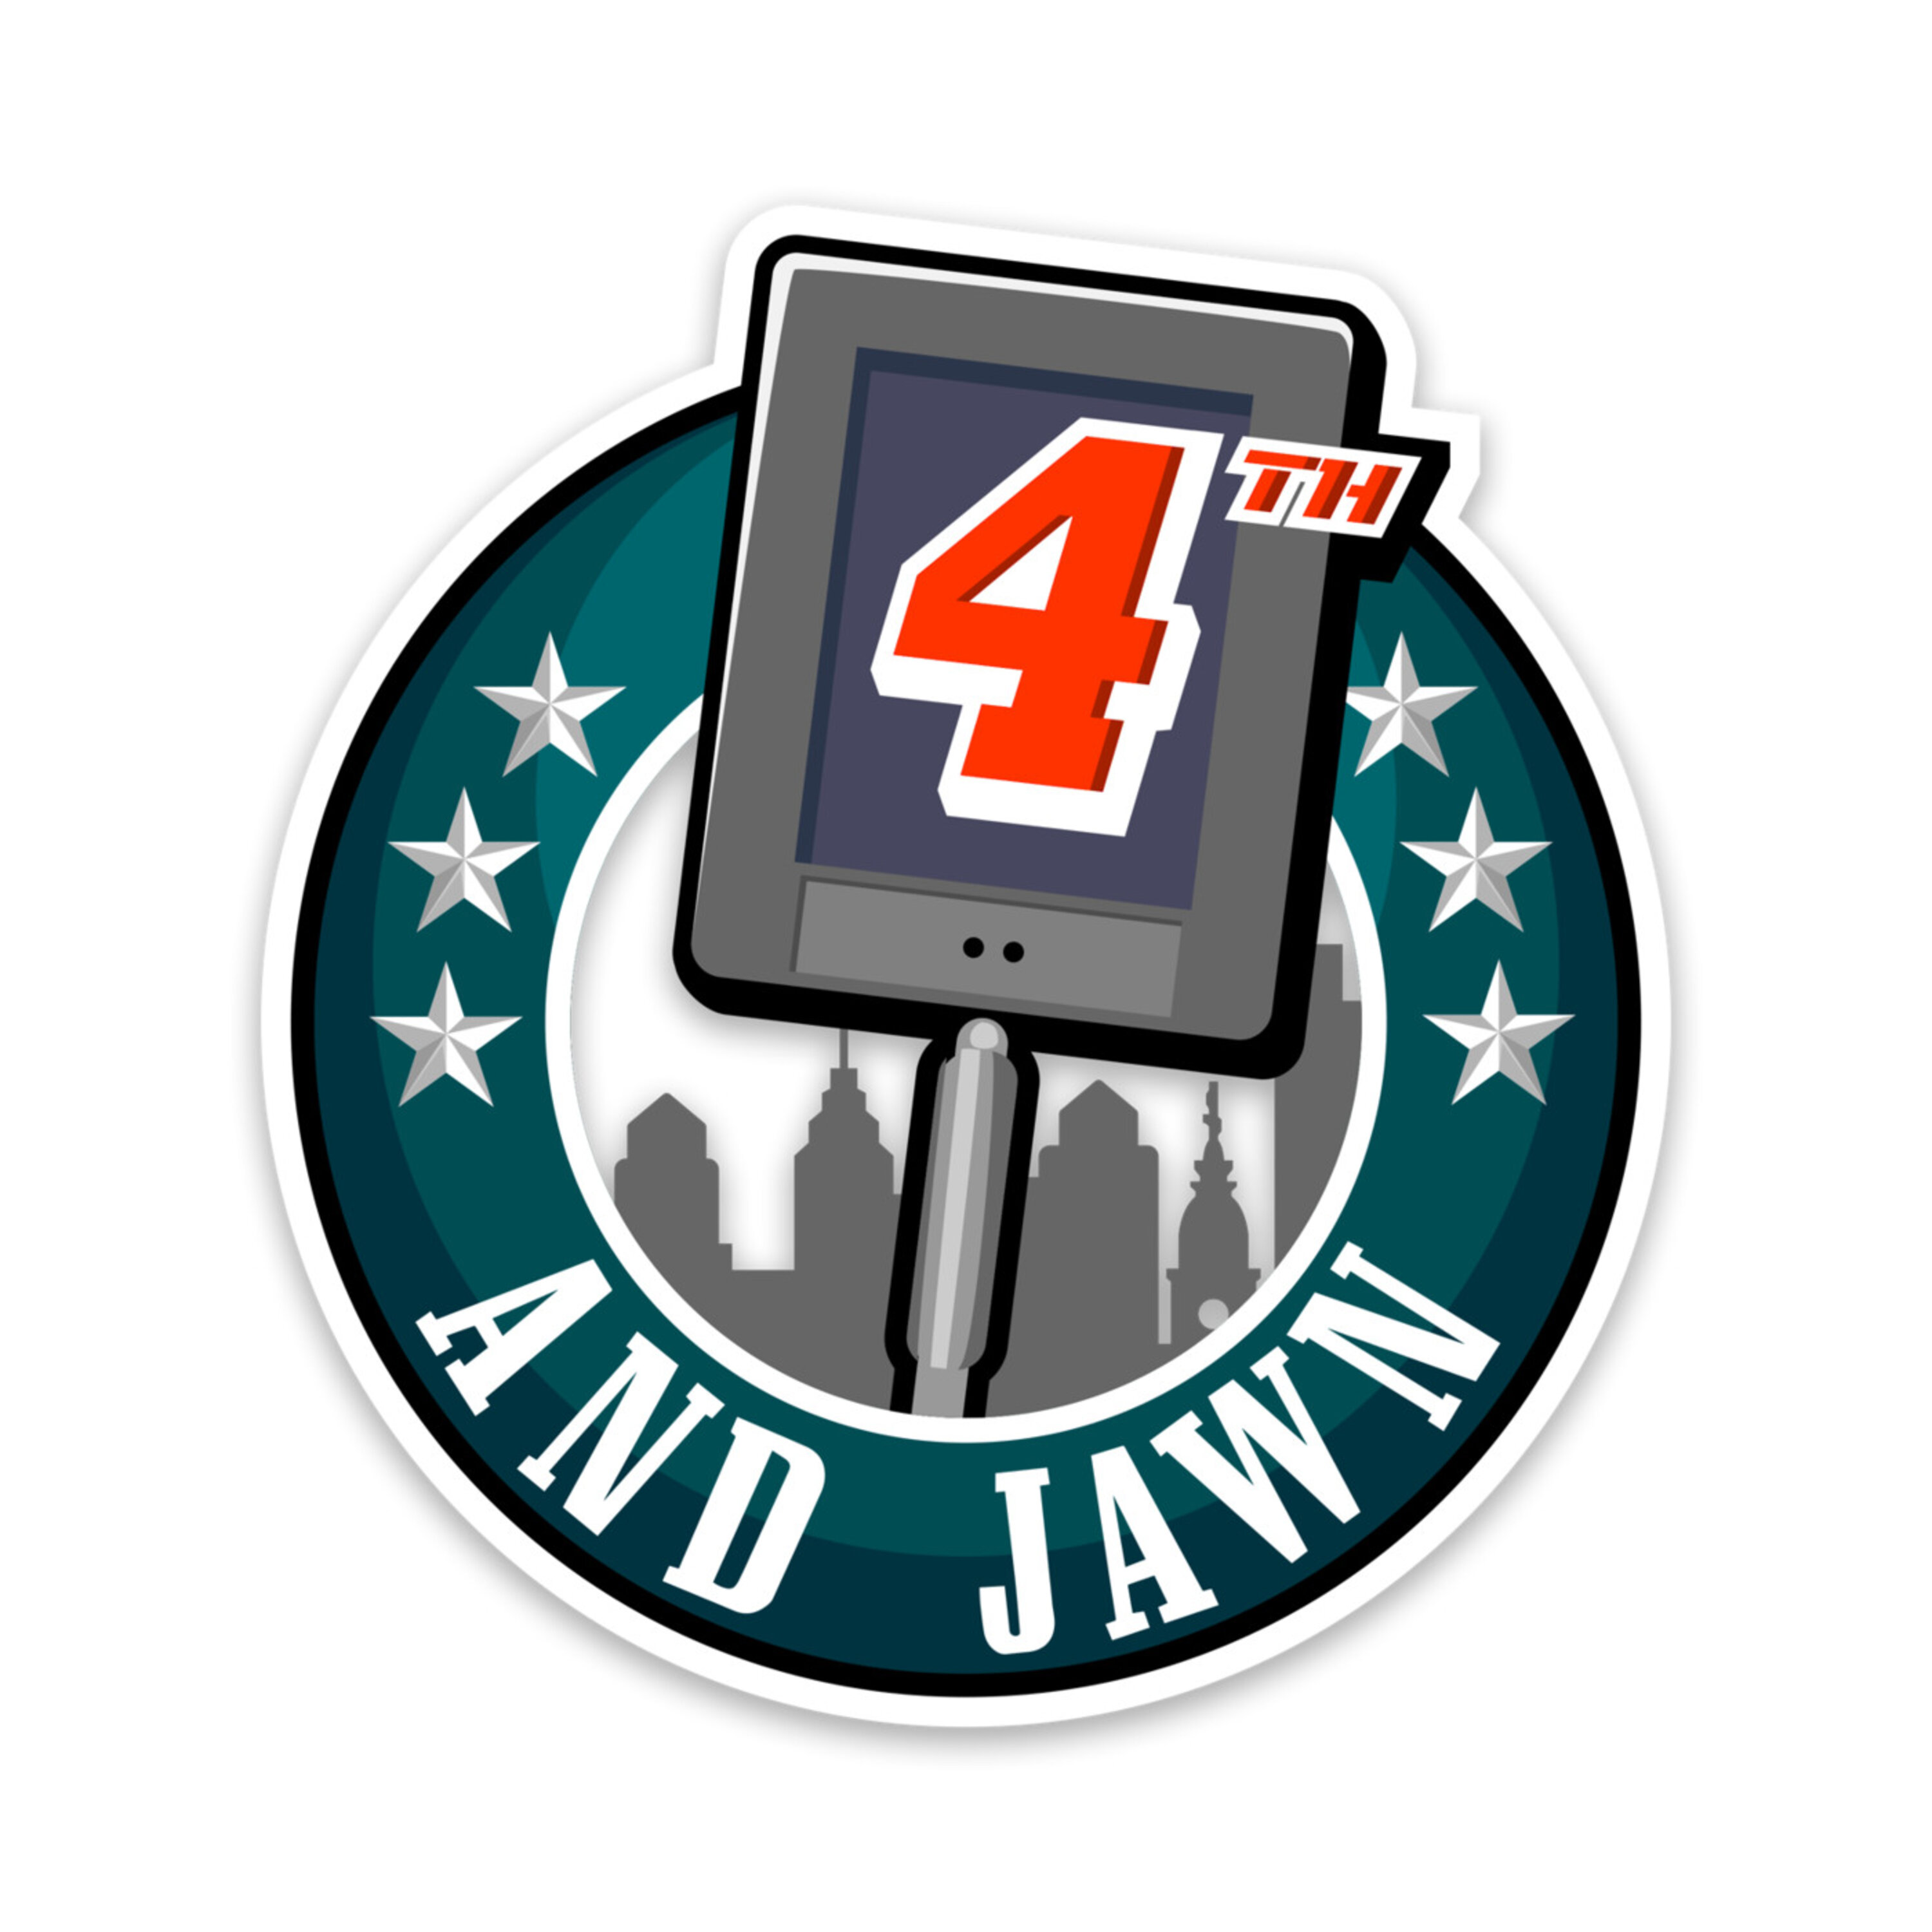 4th and Jawn - Episode 247 - Eagles vs. Aints Wrap Up/Looking Towards NYG